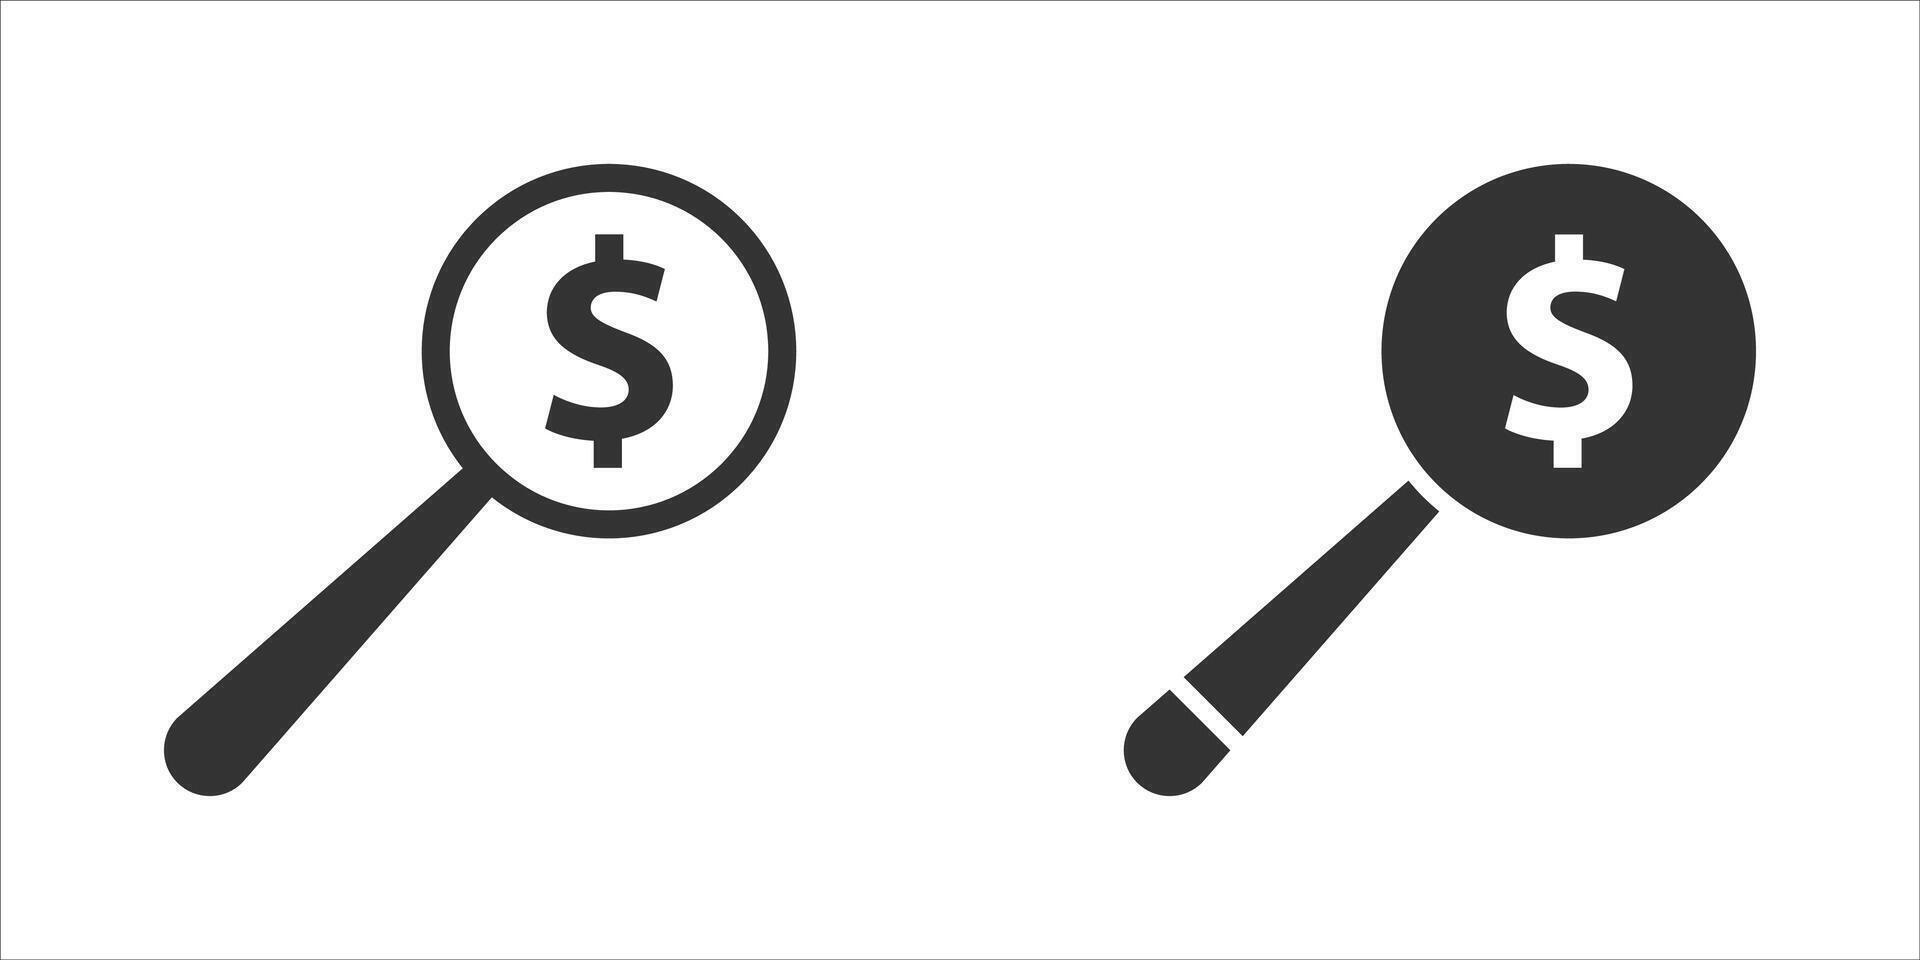 Magnifying glass icon with dollar sign. Vector illustration.